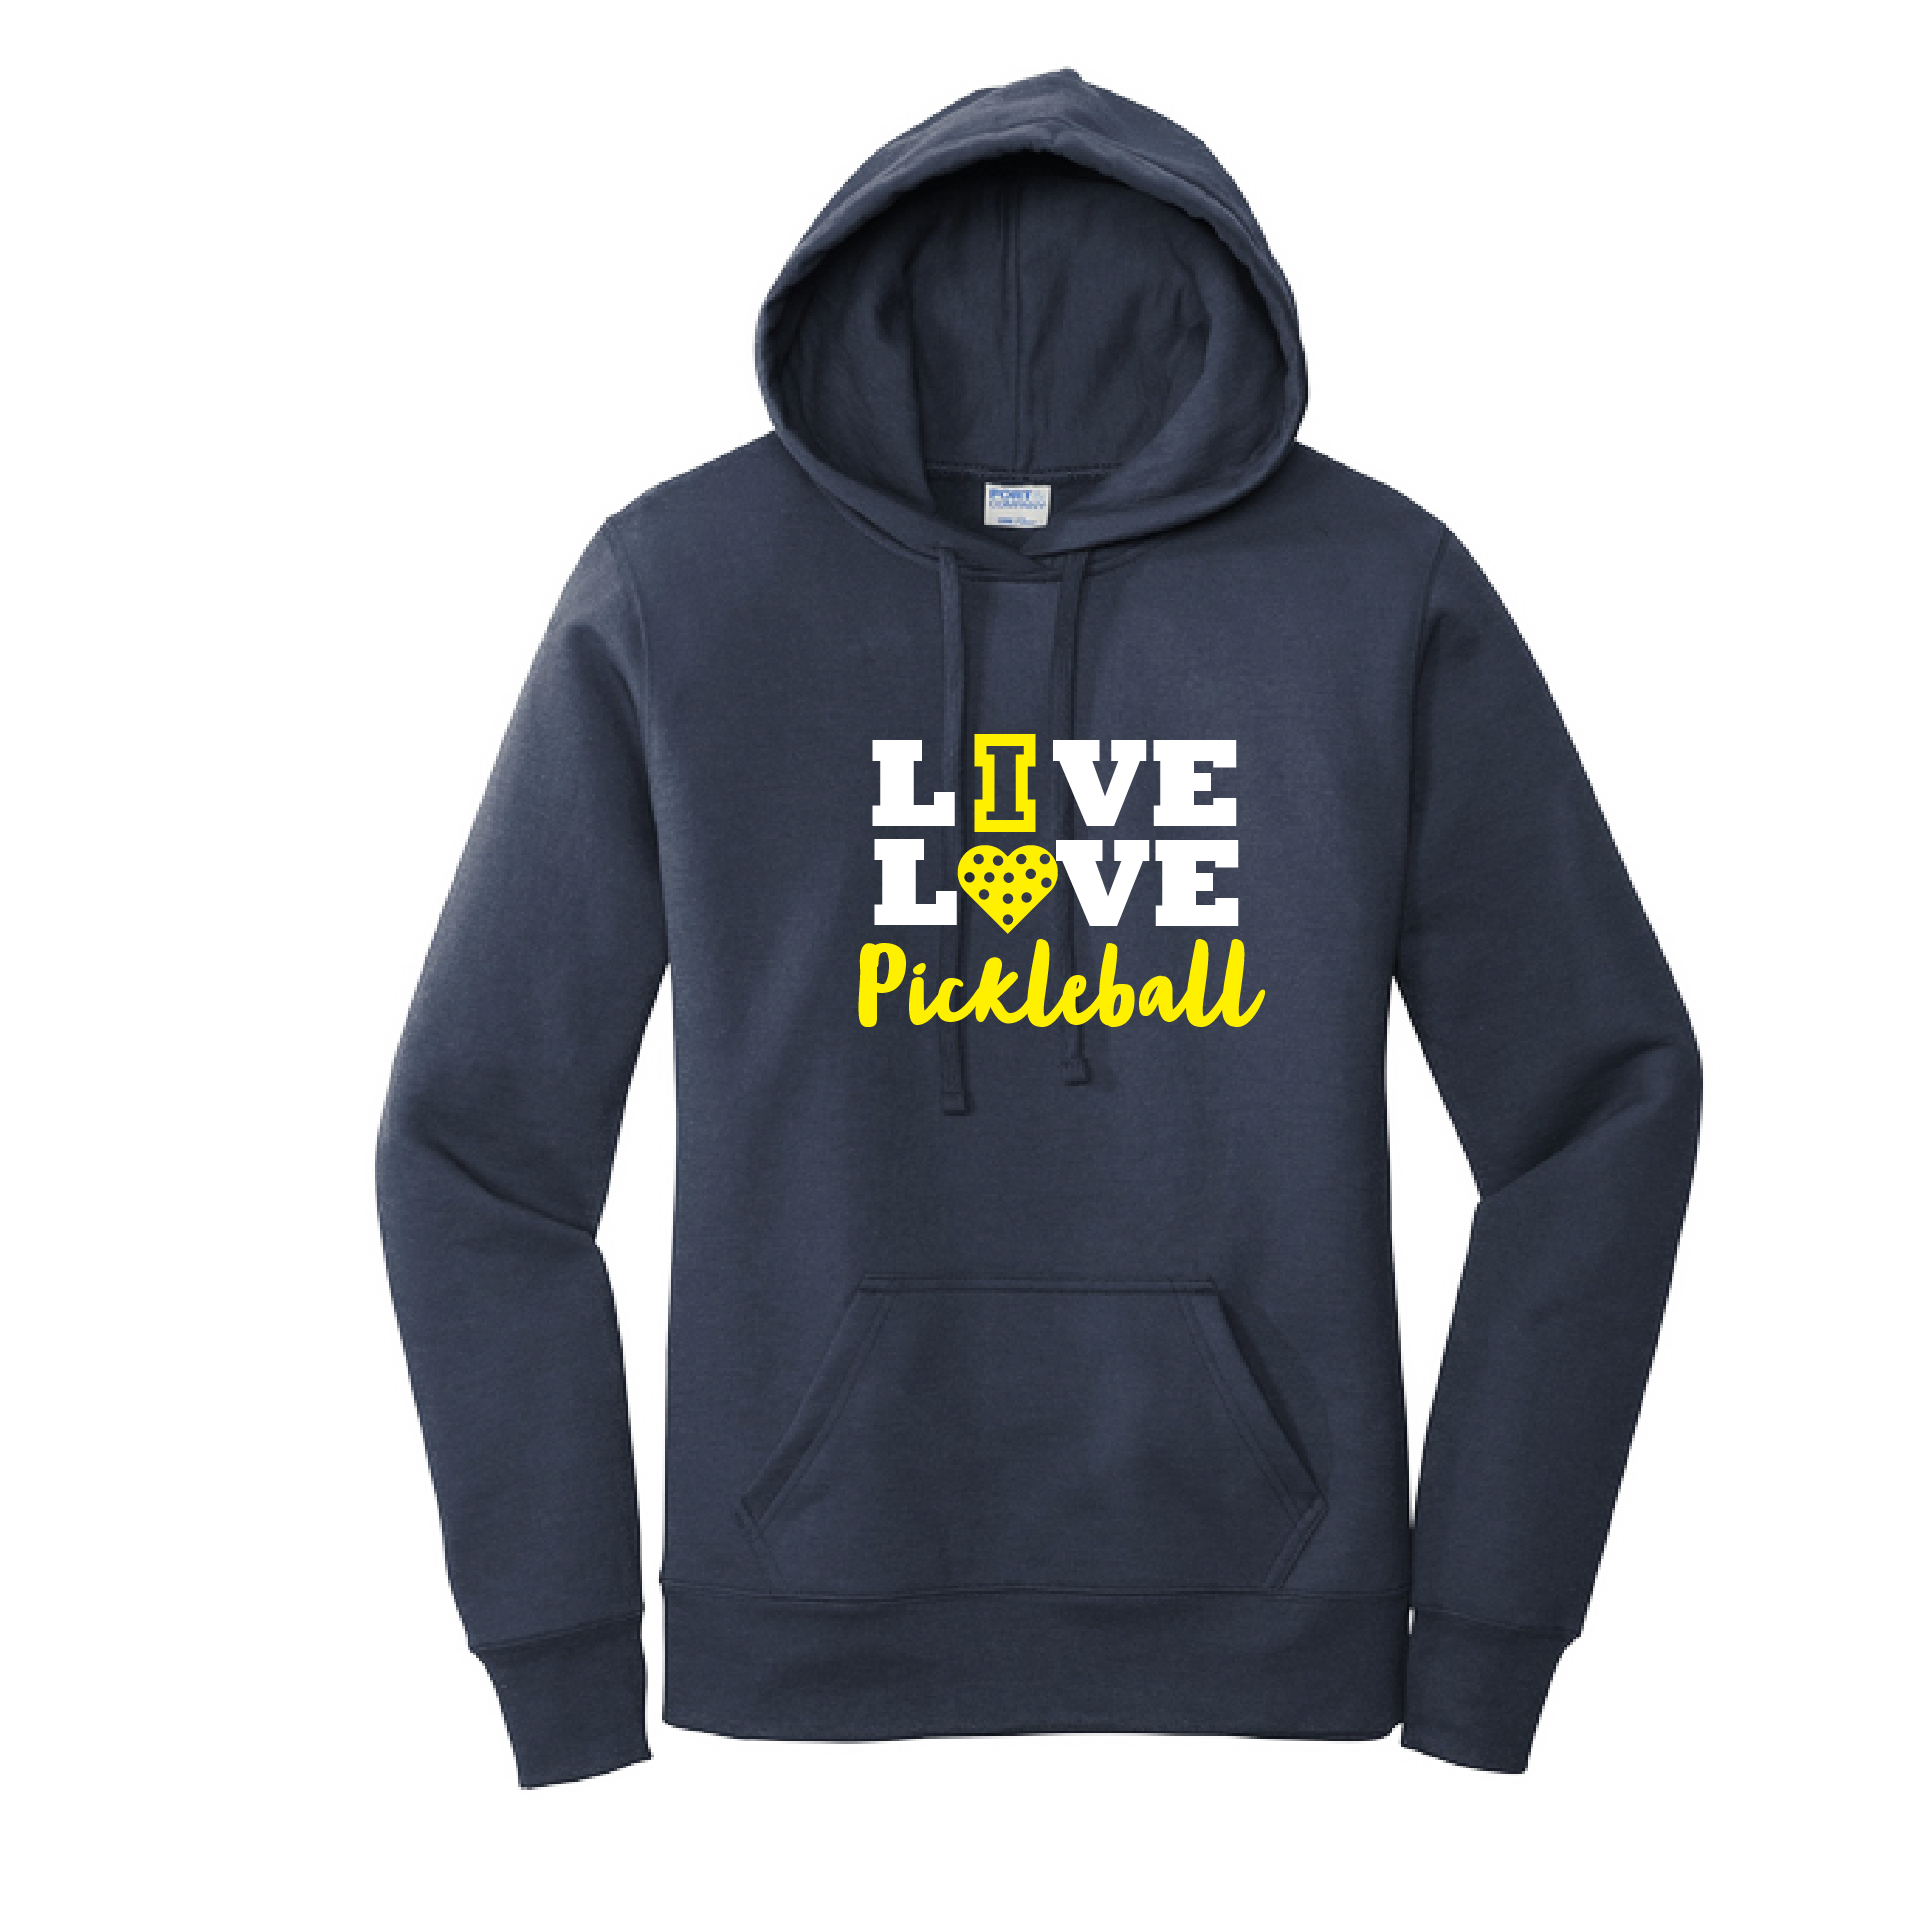 Pickleball Design: Live Love Pickleball  Women's Hooded pullover Sweatshirt  Turn up the volume in this Women's Sweatshirts with its perfect mix of softness and attitude. Ultra soft lined inside with a lined hood also. This is fitted nicely for a women's figure. Front pouch pocket.